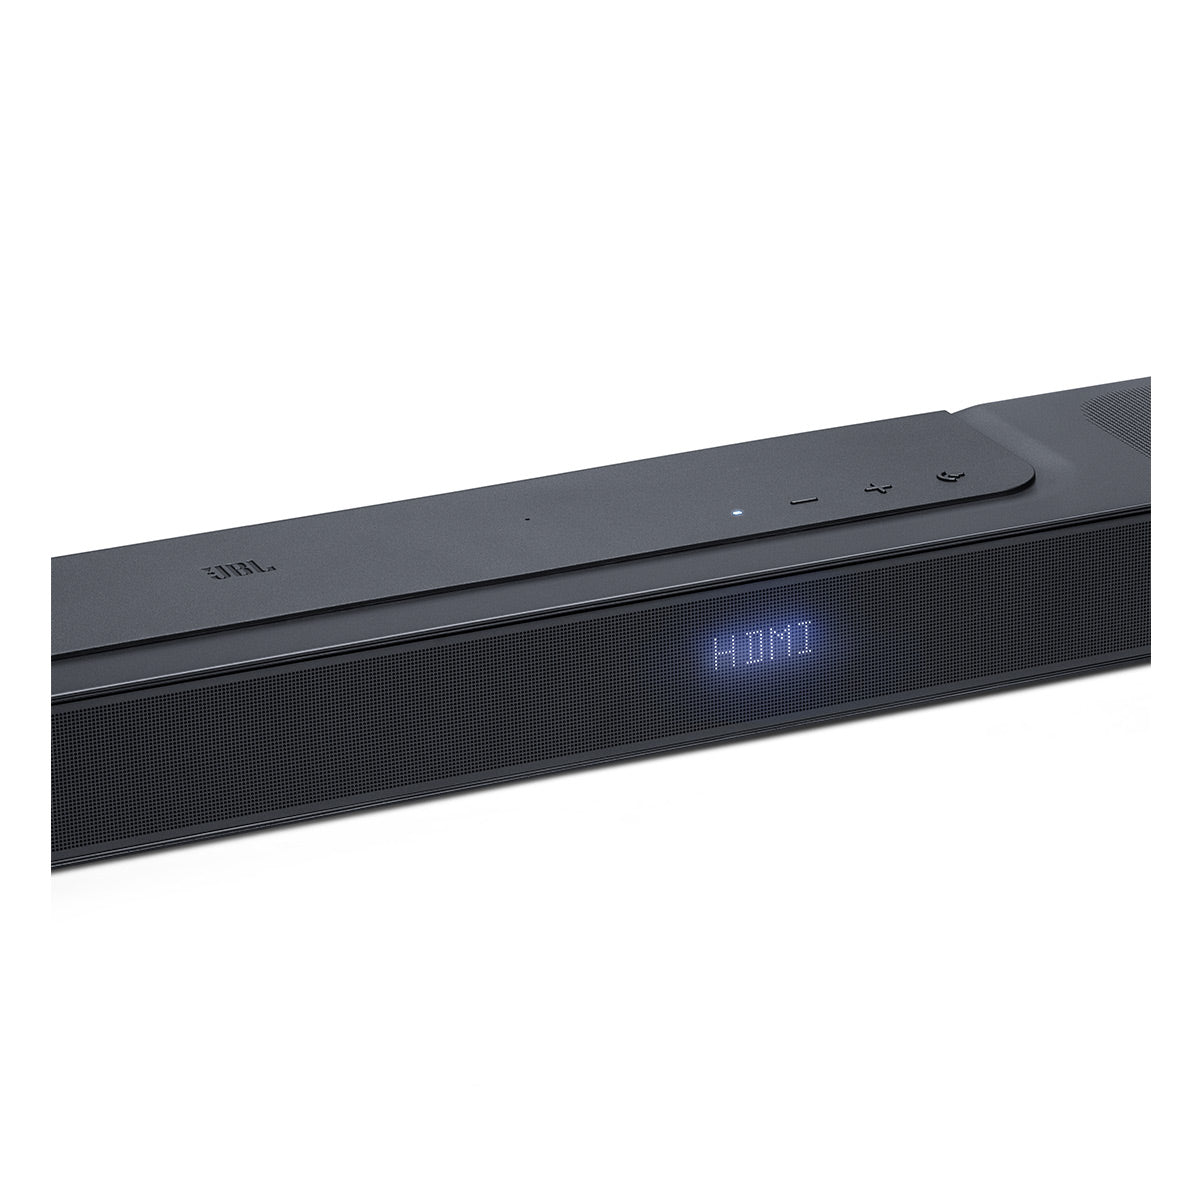 JBL Bar 1000 Surround Sound System with 7.1.4 Channel Soundbar, 10" Wireless Subwoofer, and Detachable Rear Speakers